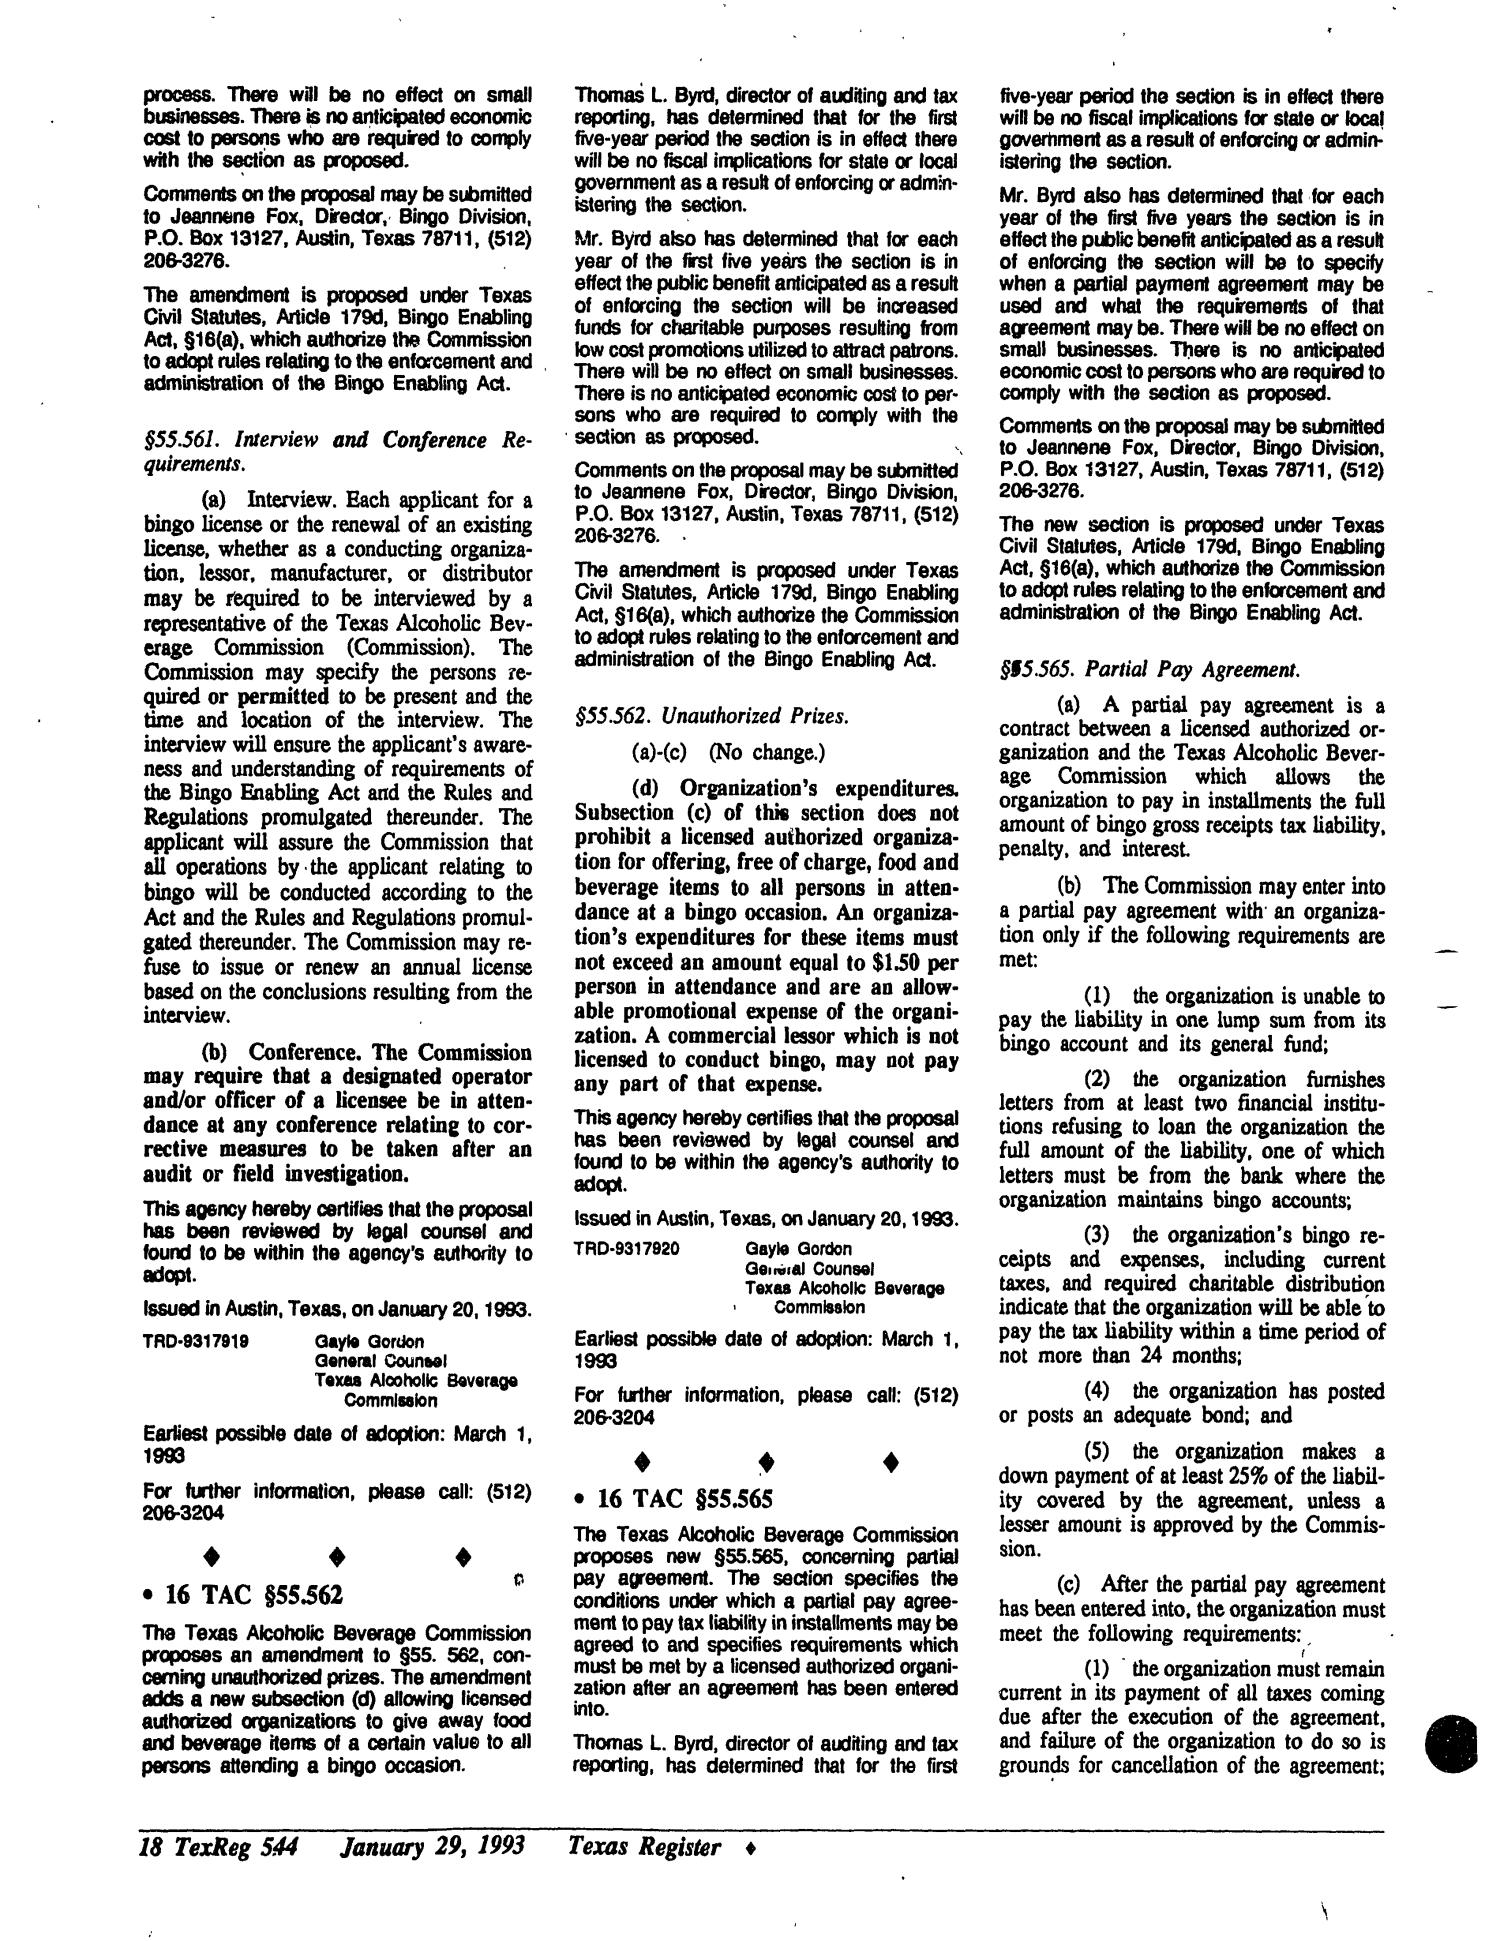 Texas Register, Volume 18, Number 8, Pages 509-618, January 29, 1993
                                                
                                                    544
                                                